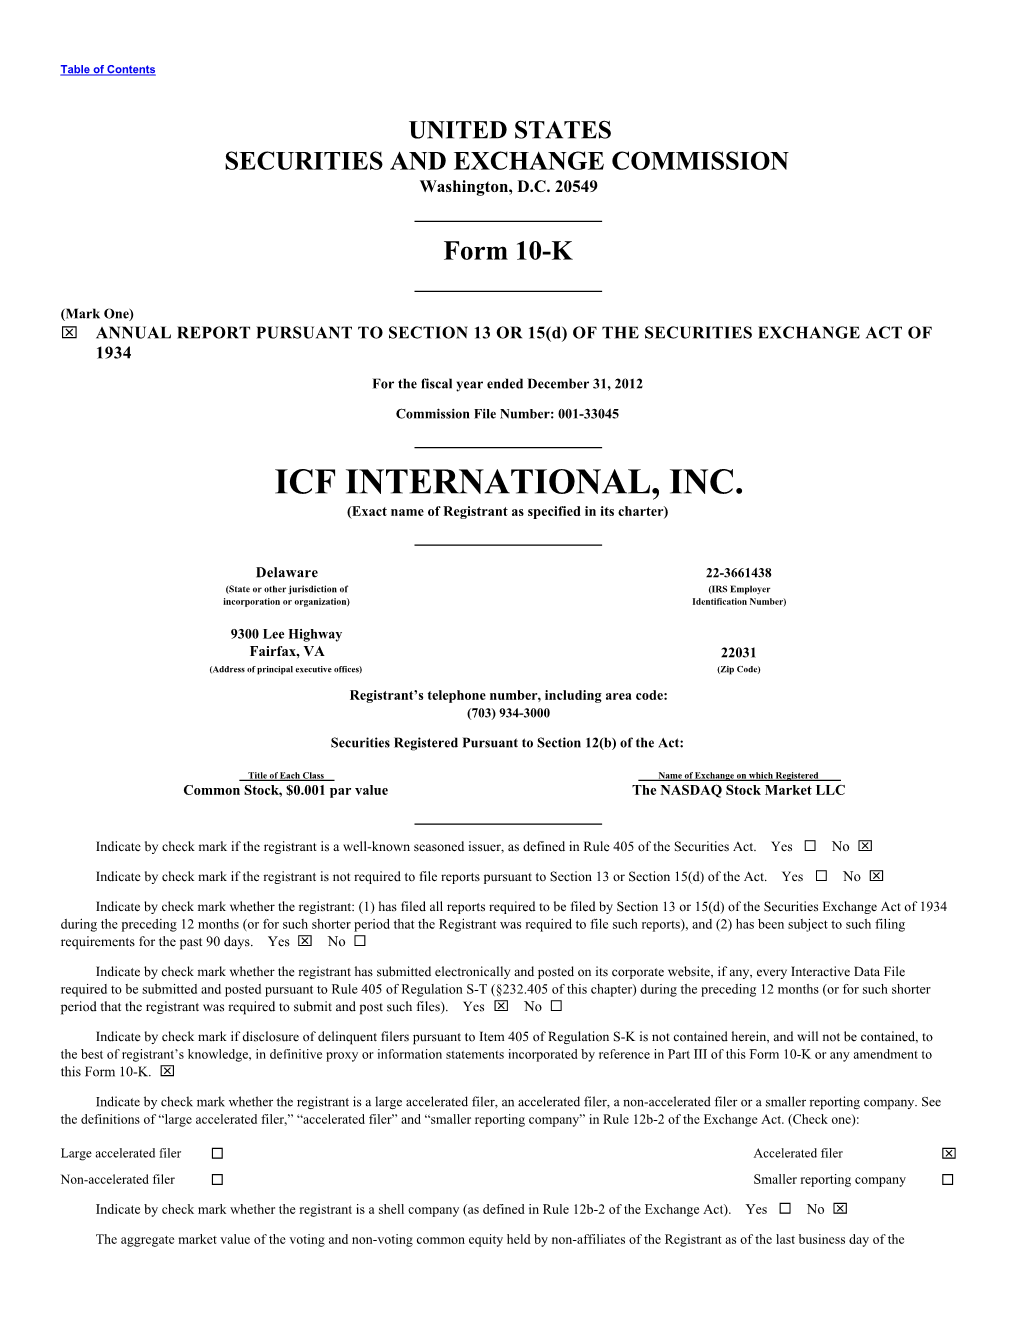 ICF INTERNATIONAL, INC. (Exact Name of Registrant As Specified in Its Charter)